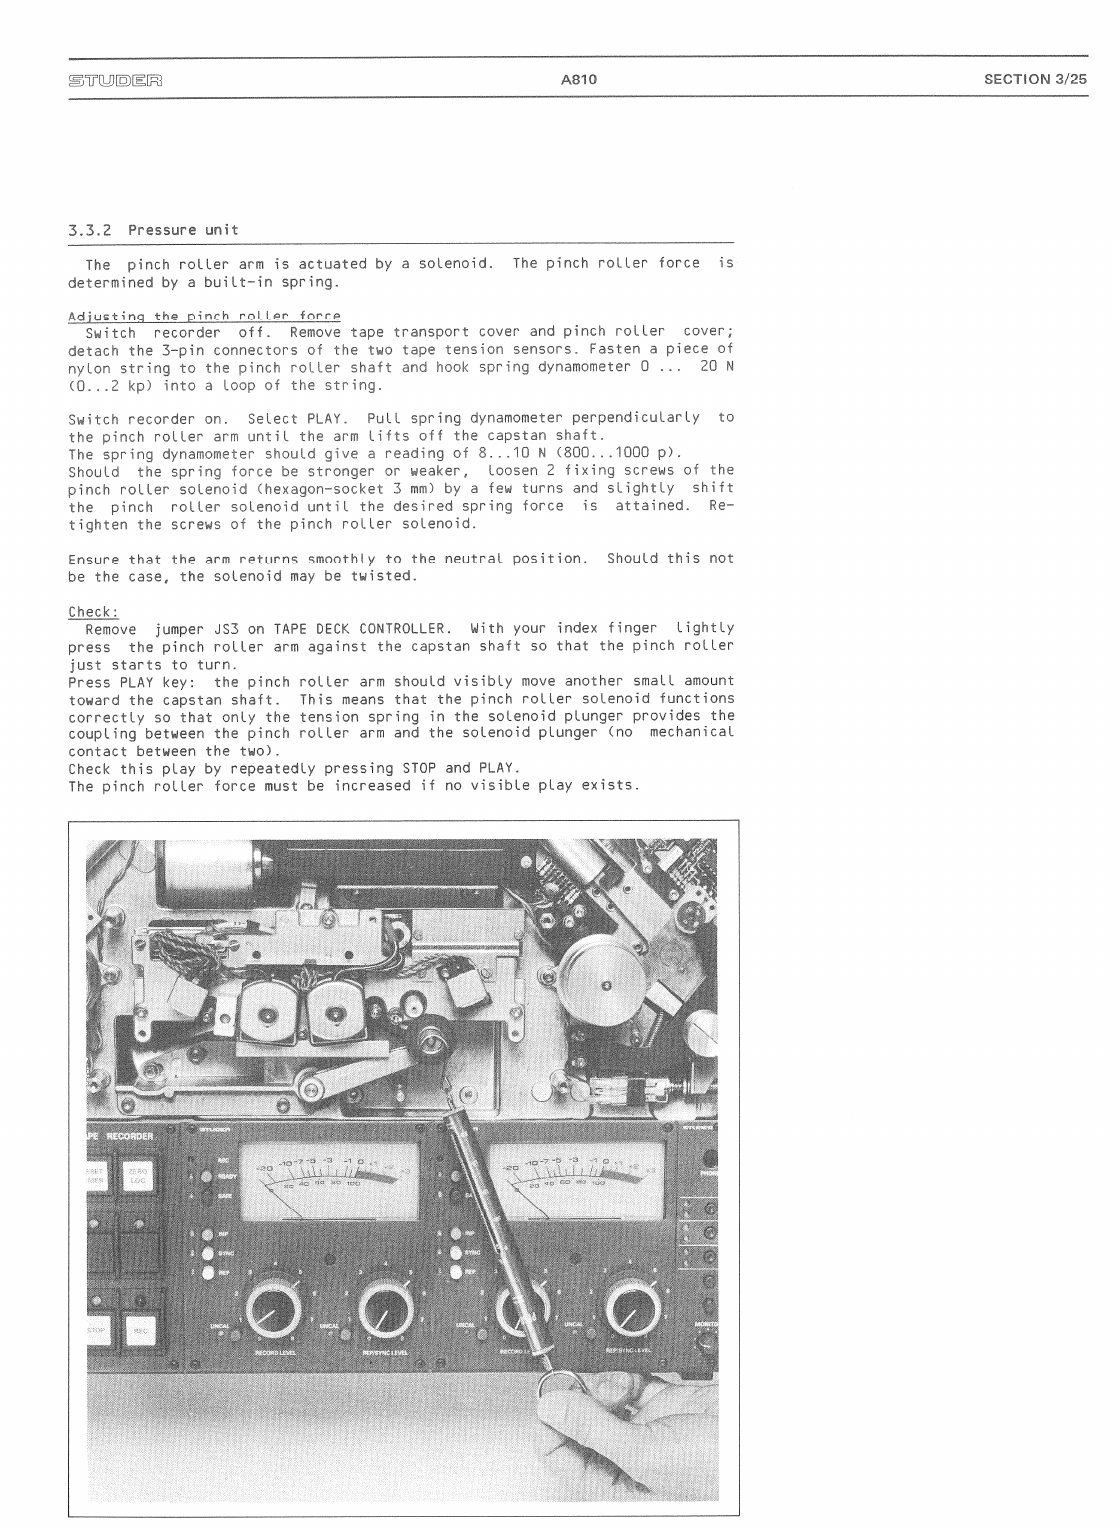 Operating and Service Instructions for Studer A810